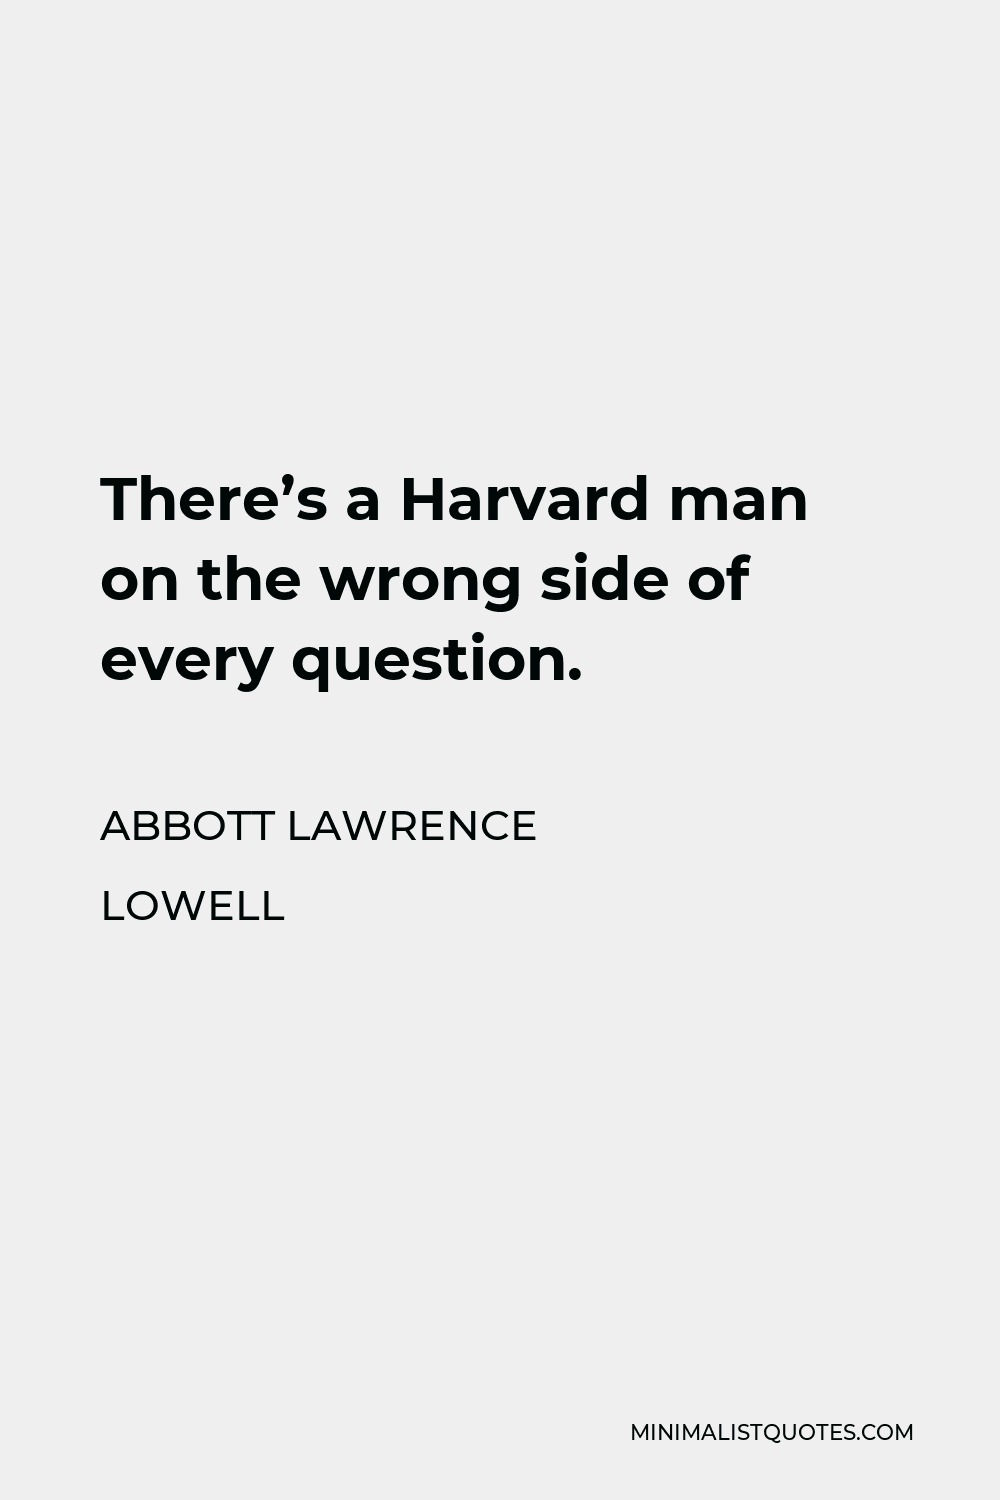 Abbott Lawrence Lowell Quote - There’s a Harvard man on the wrong side of every question.